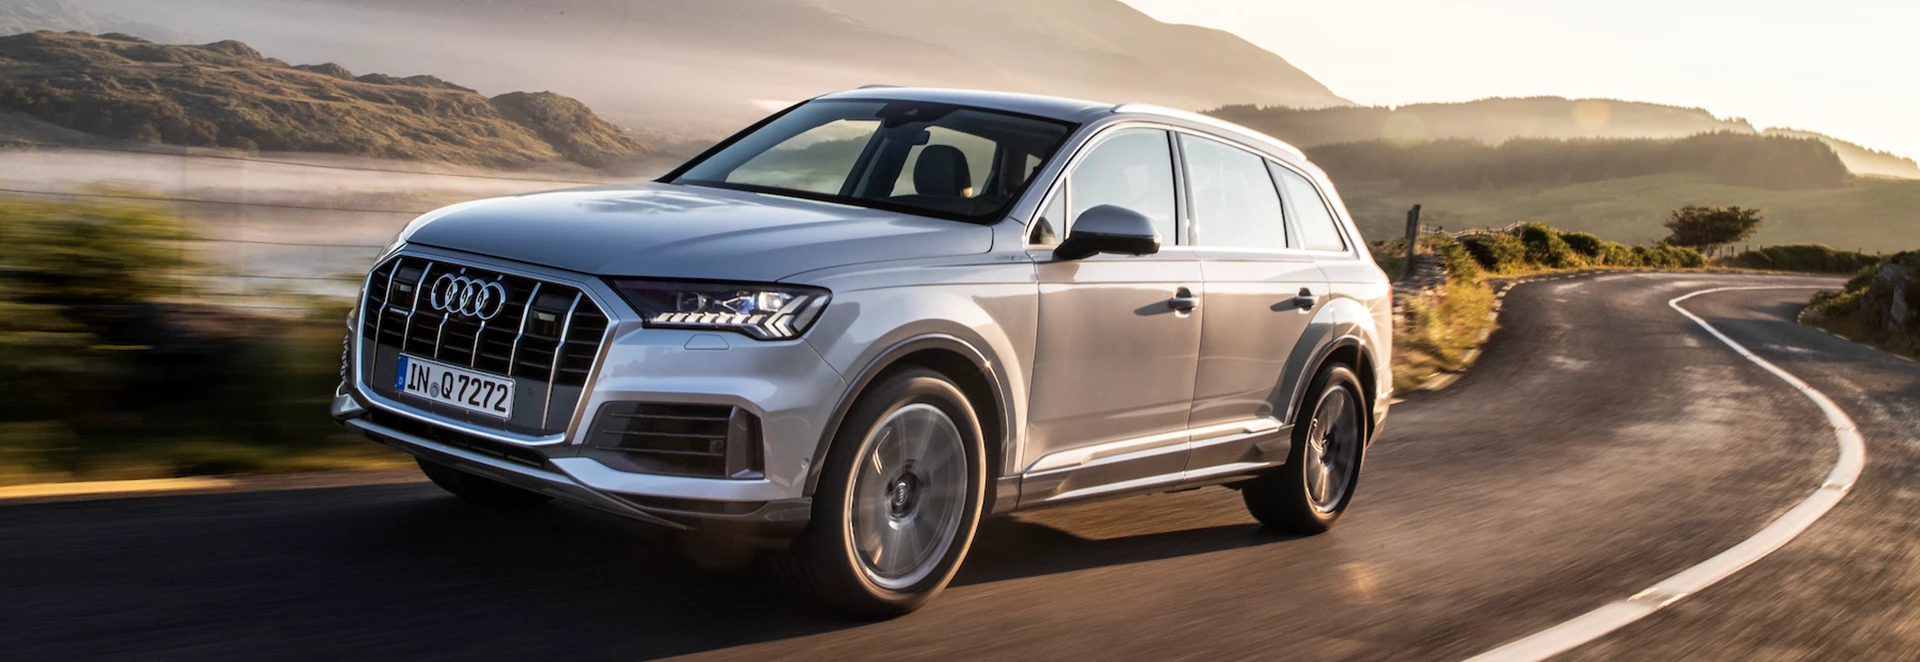 5 reasons why the facelifted Audi Q7 is the ultimate SUV